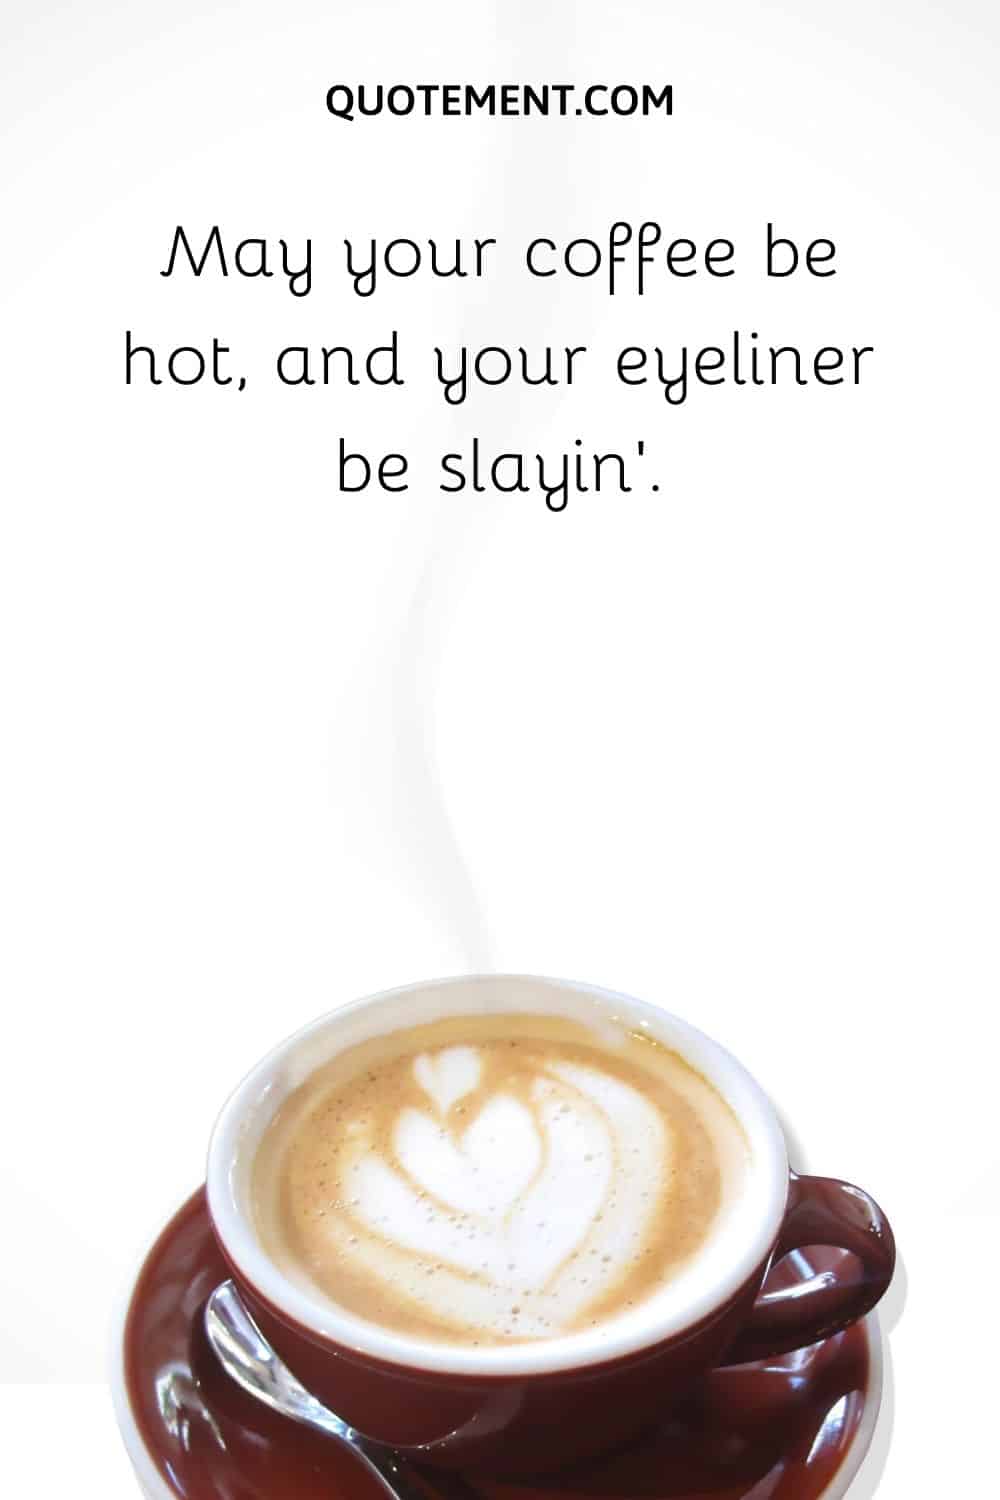 May your coffee be hot, and your eyeliner be slayin’